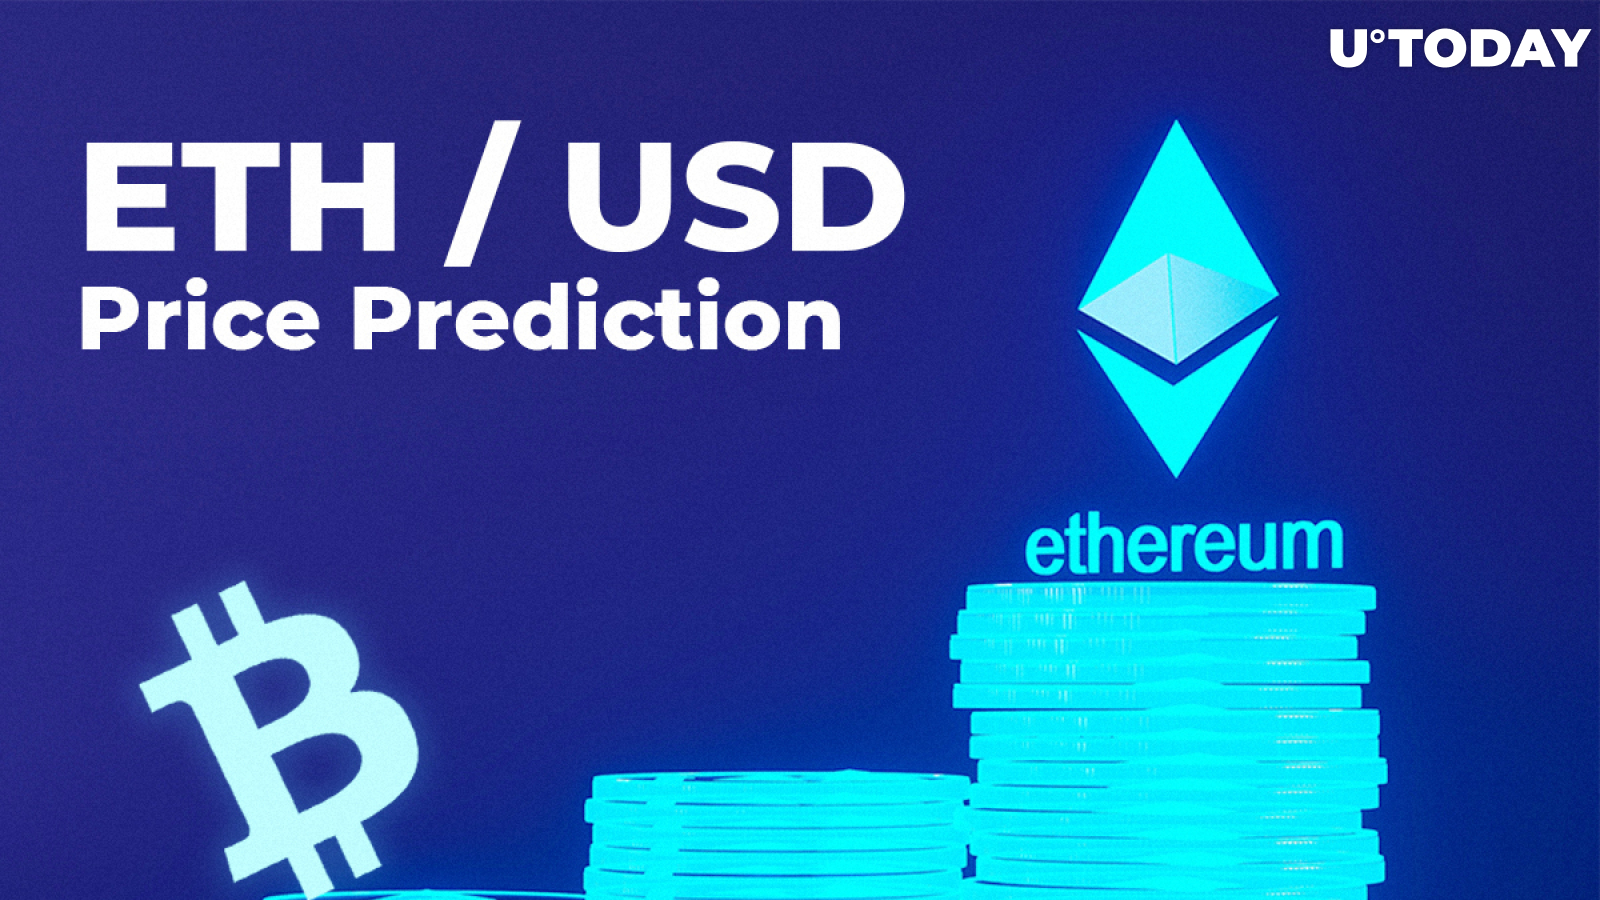 ETH/USD Price Prediction — Are Bulls Switching from Bitcoin to Ethereum?